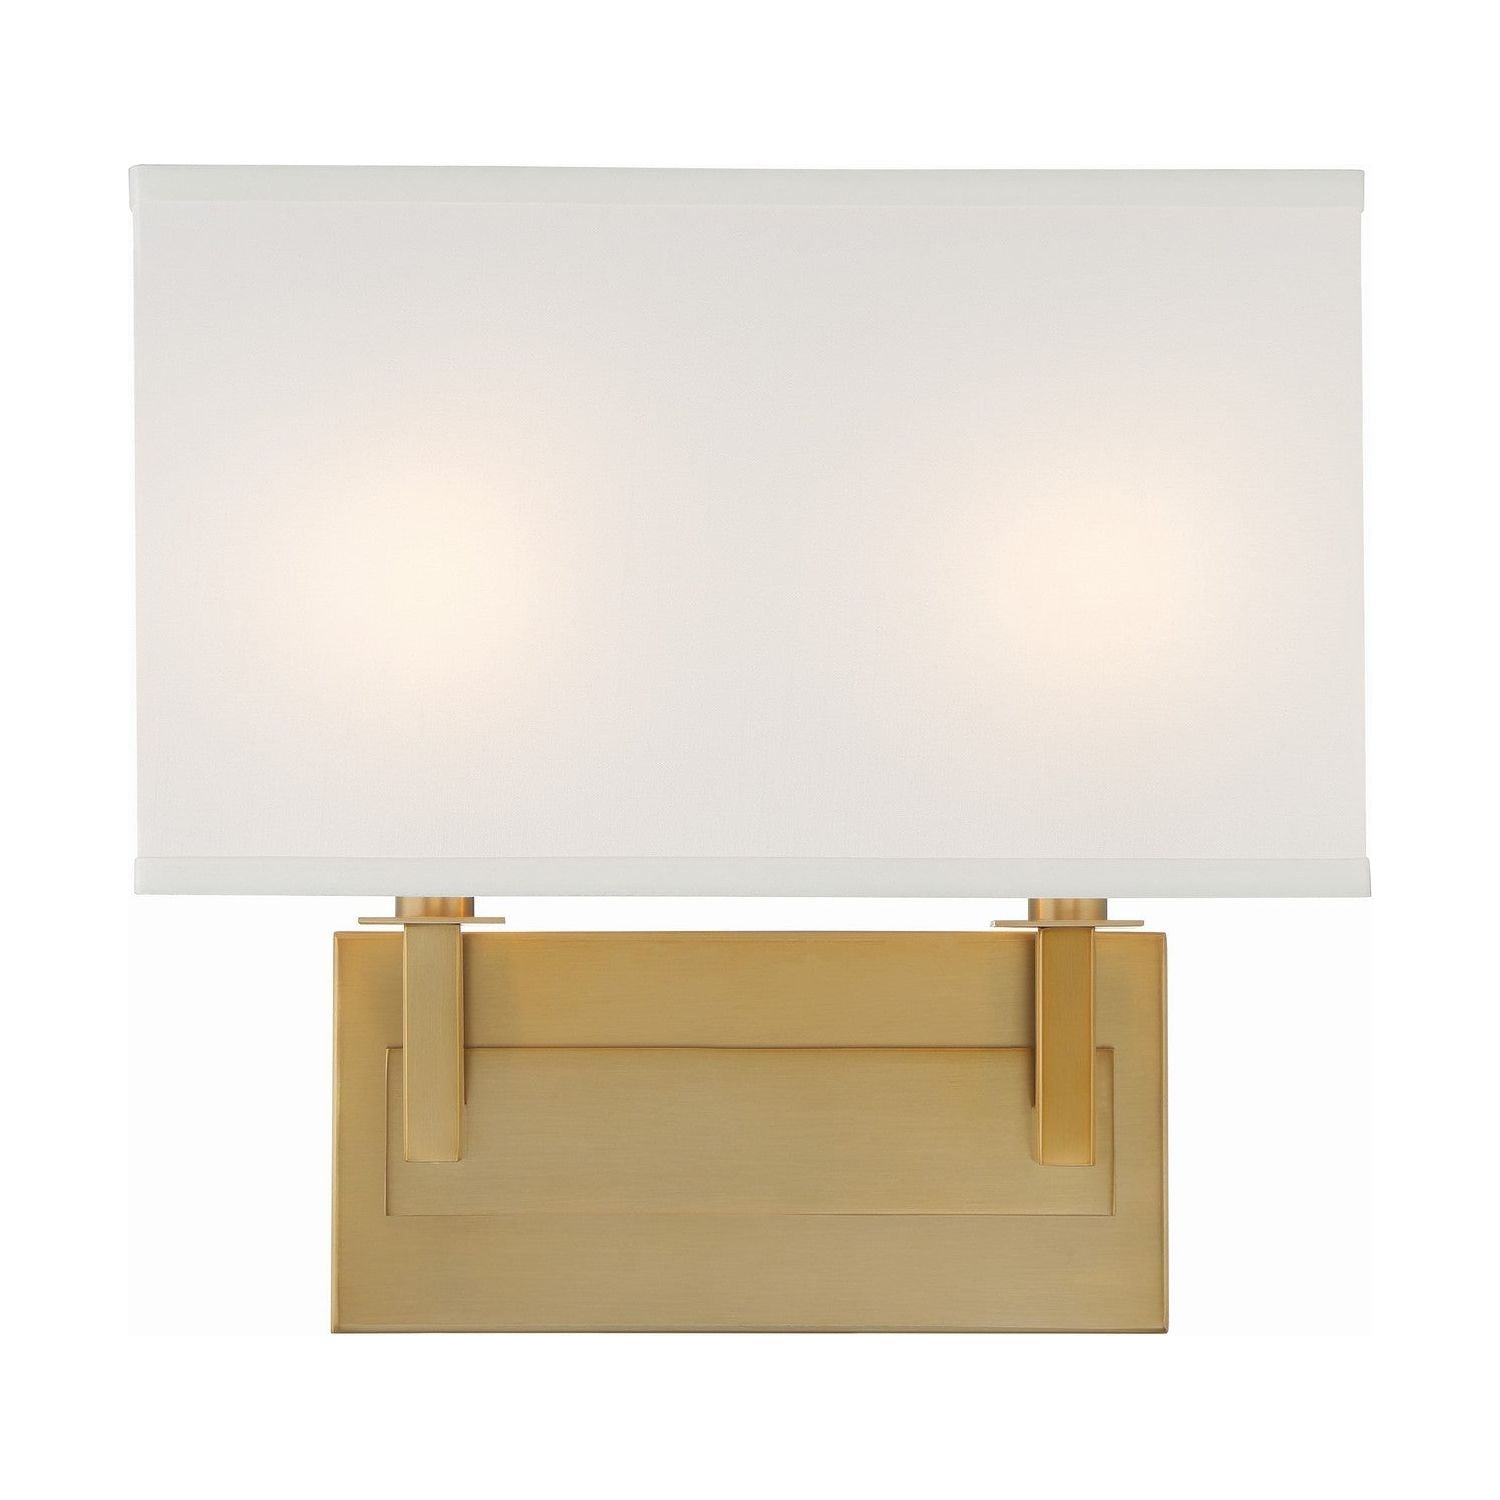 Crystorama - DUR-A3542-VG - Two Light Wall Sconce - Durham - Vibrant Gold